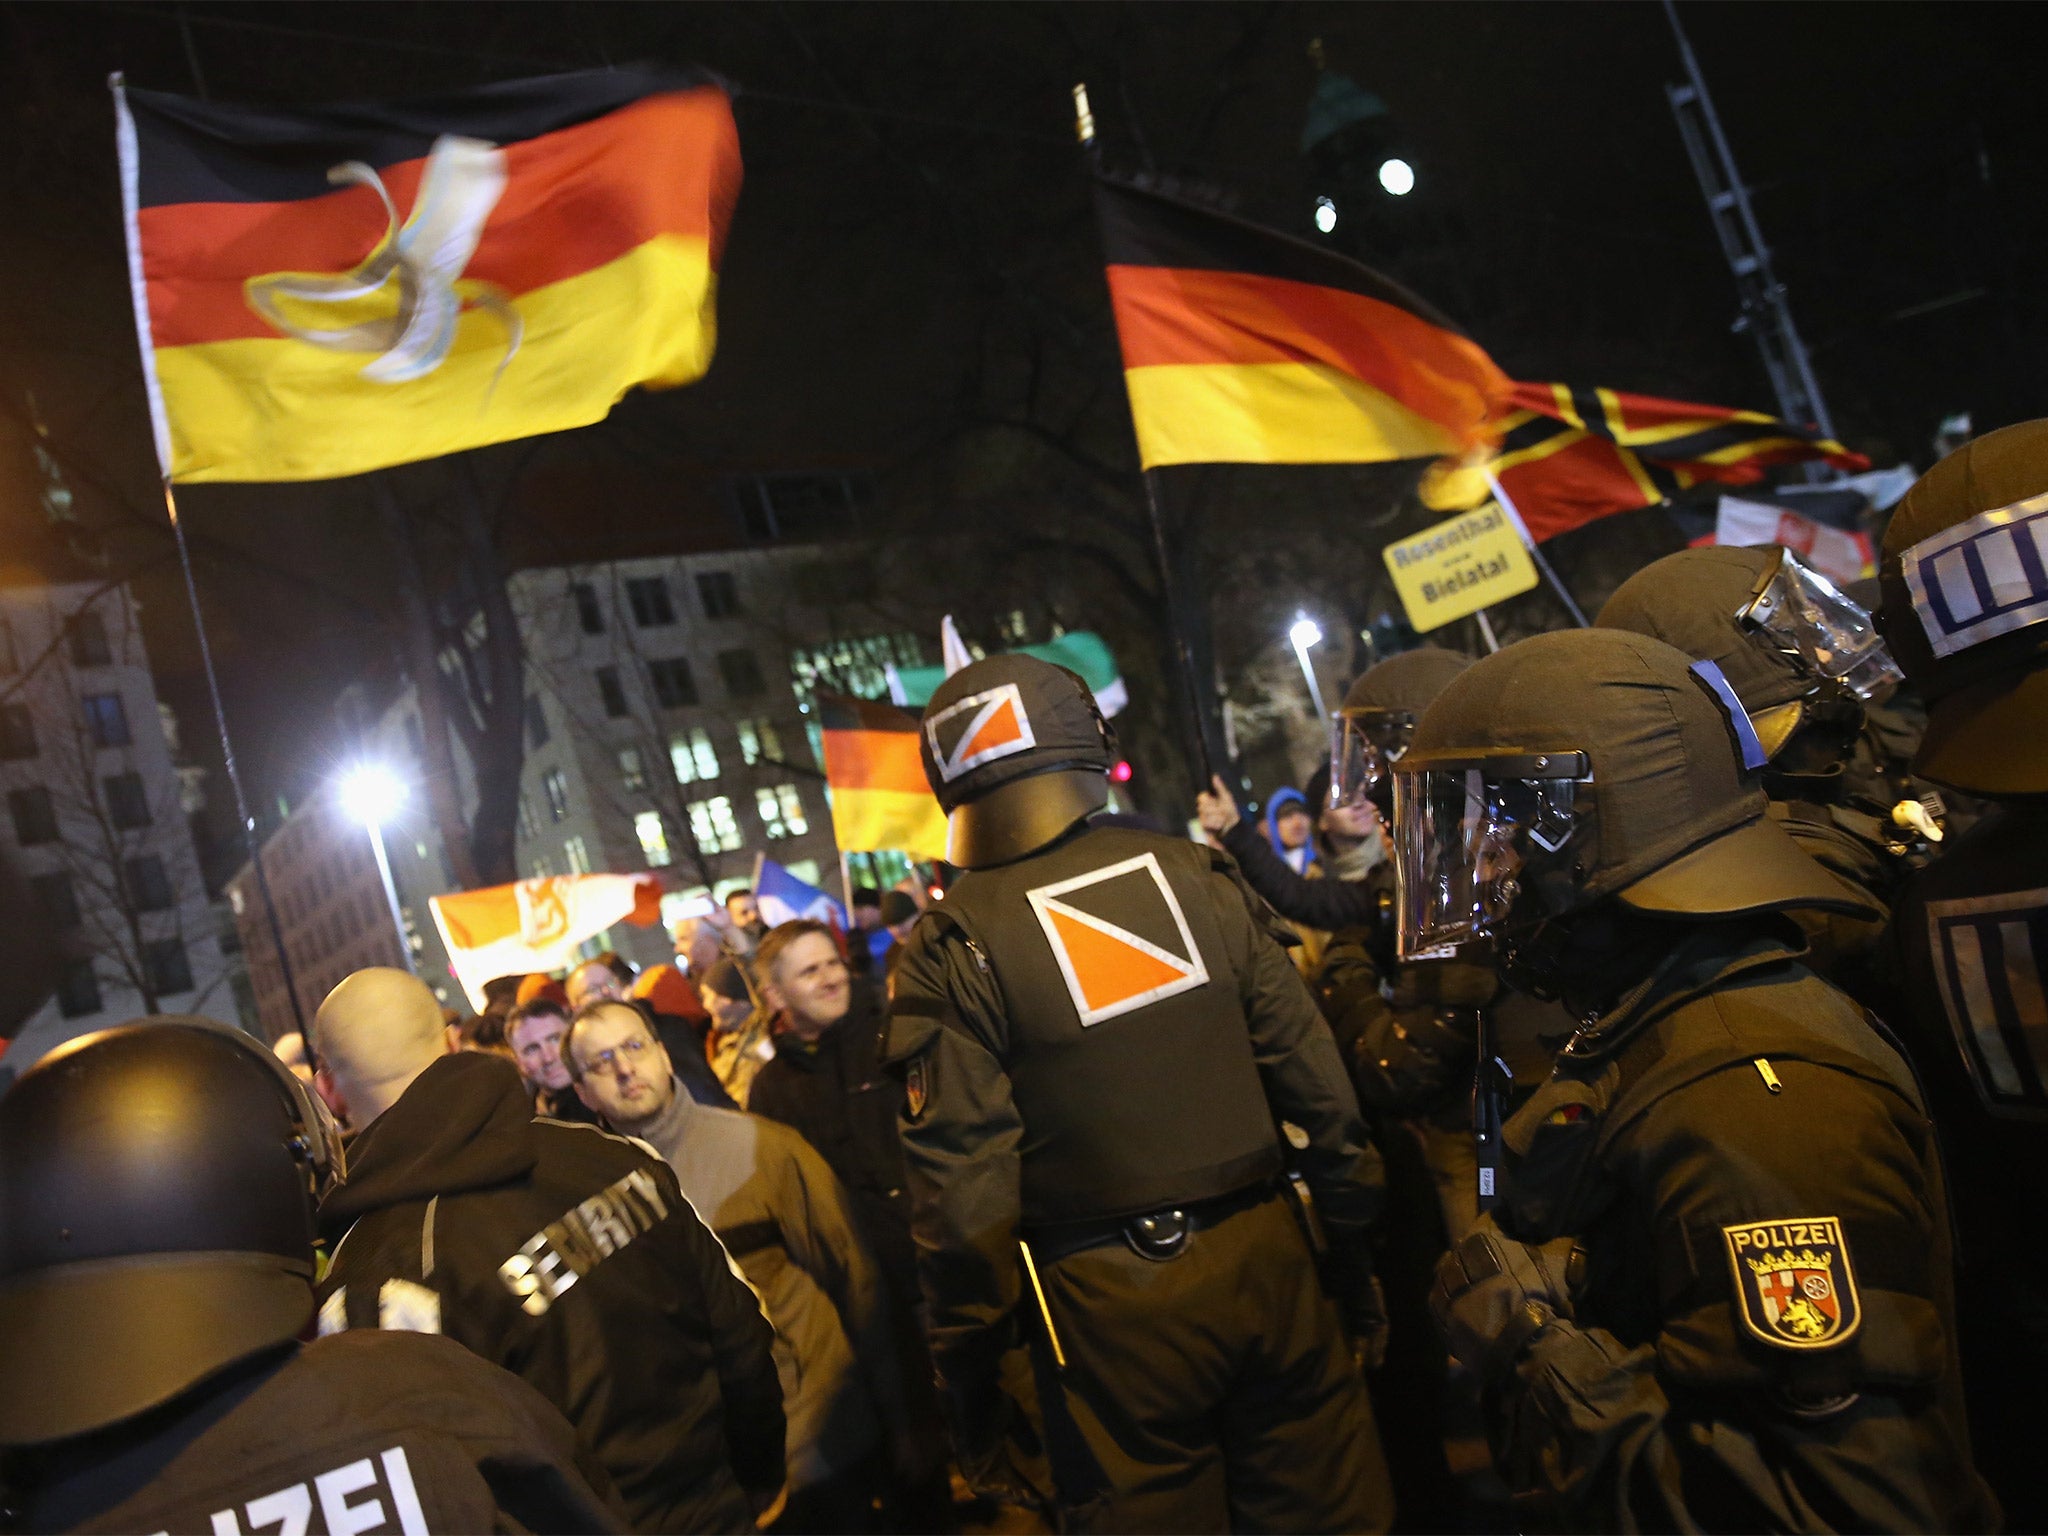 Supporters of the Pegida movement wave German flags during their protest in Dresden, Germany, on Monday